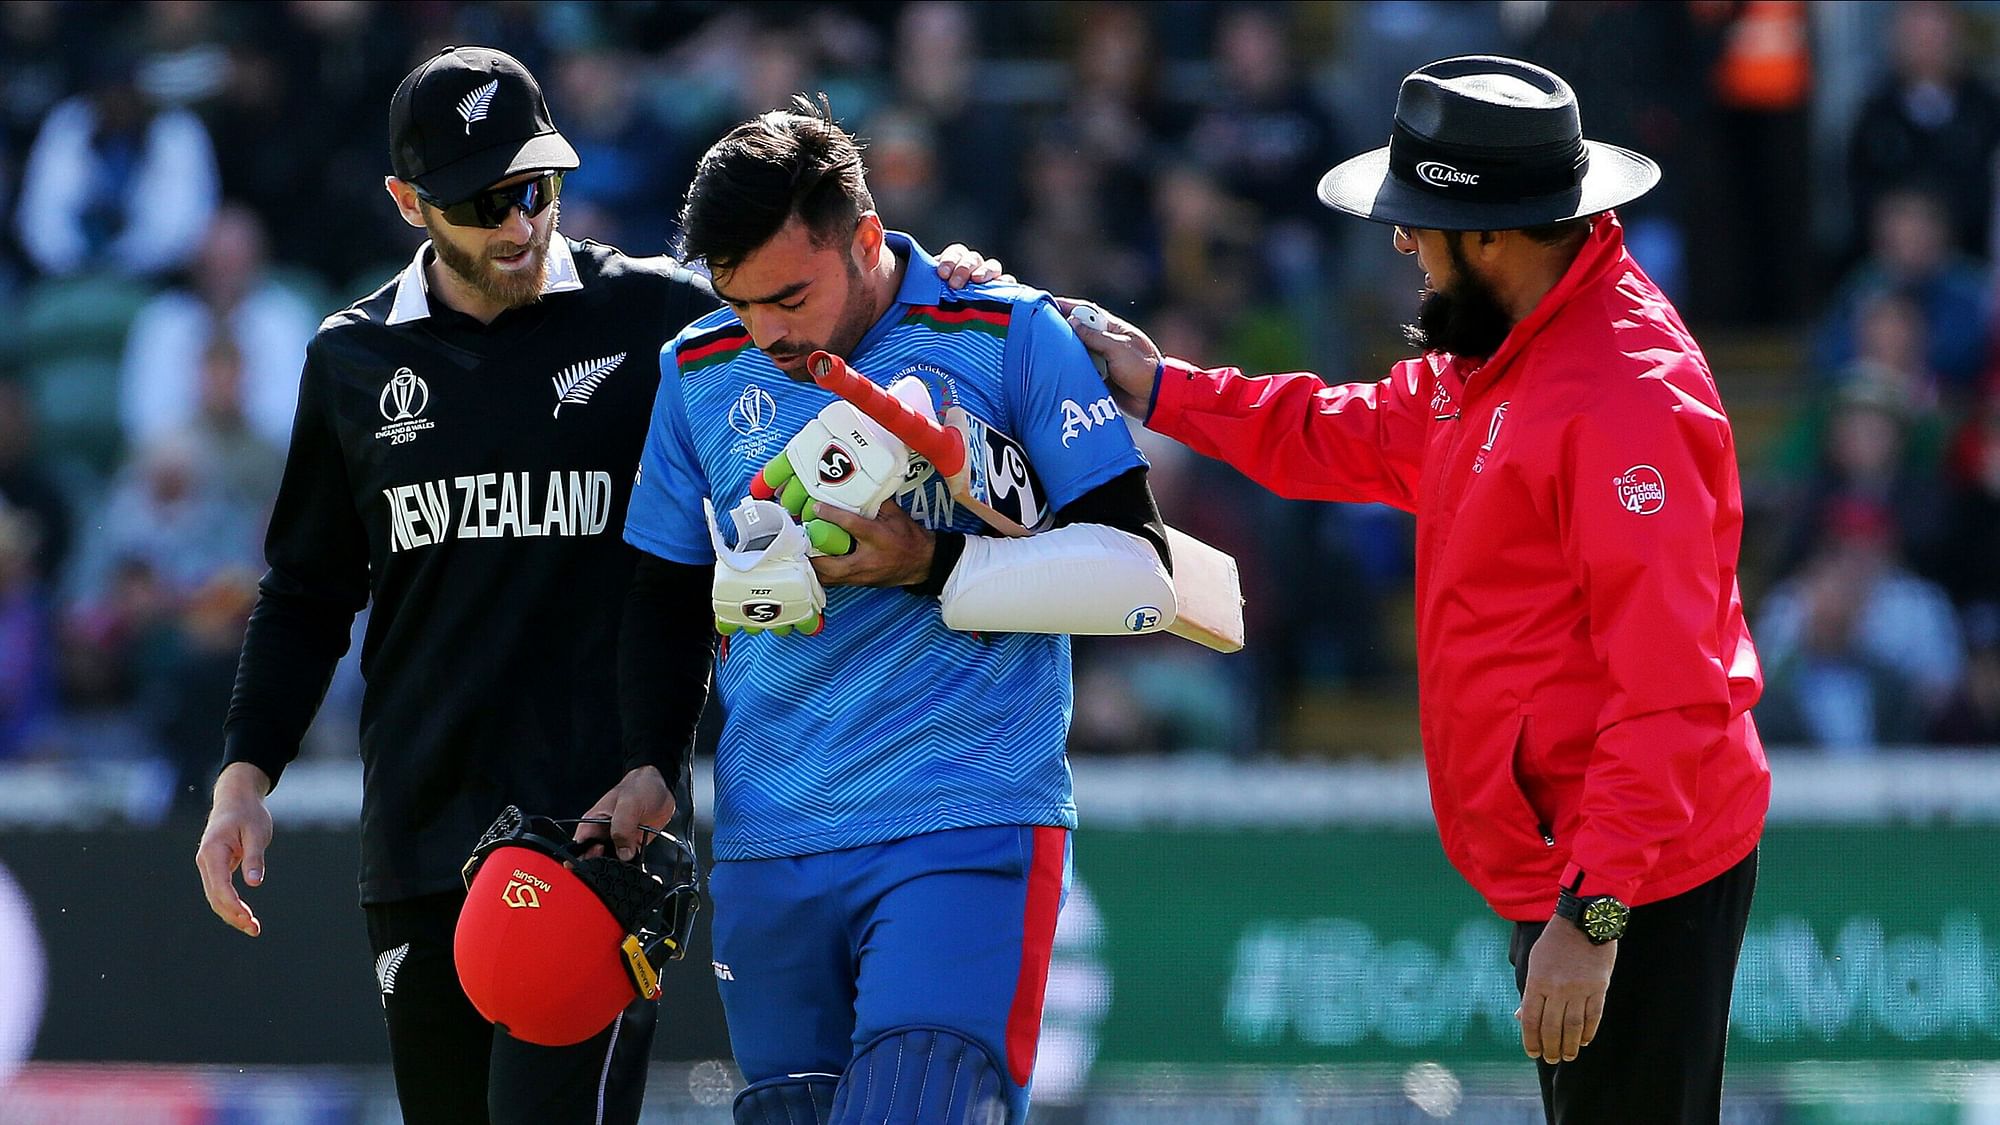 Afghanistan’s star leg-spinner Rashid Khan was ruled out of their ICC World Cup match against New Zealand after he was hit on the helmet.